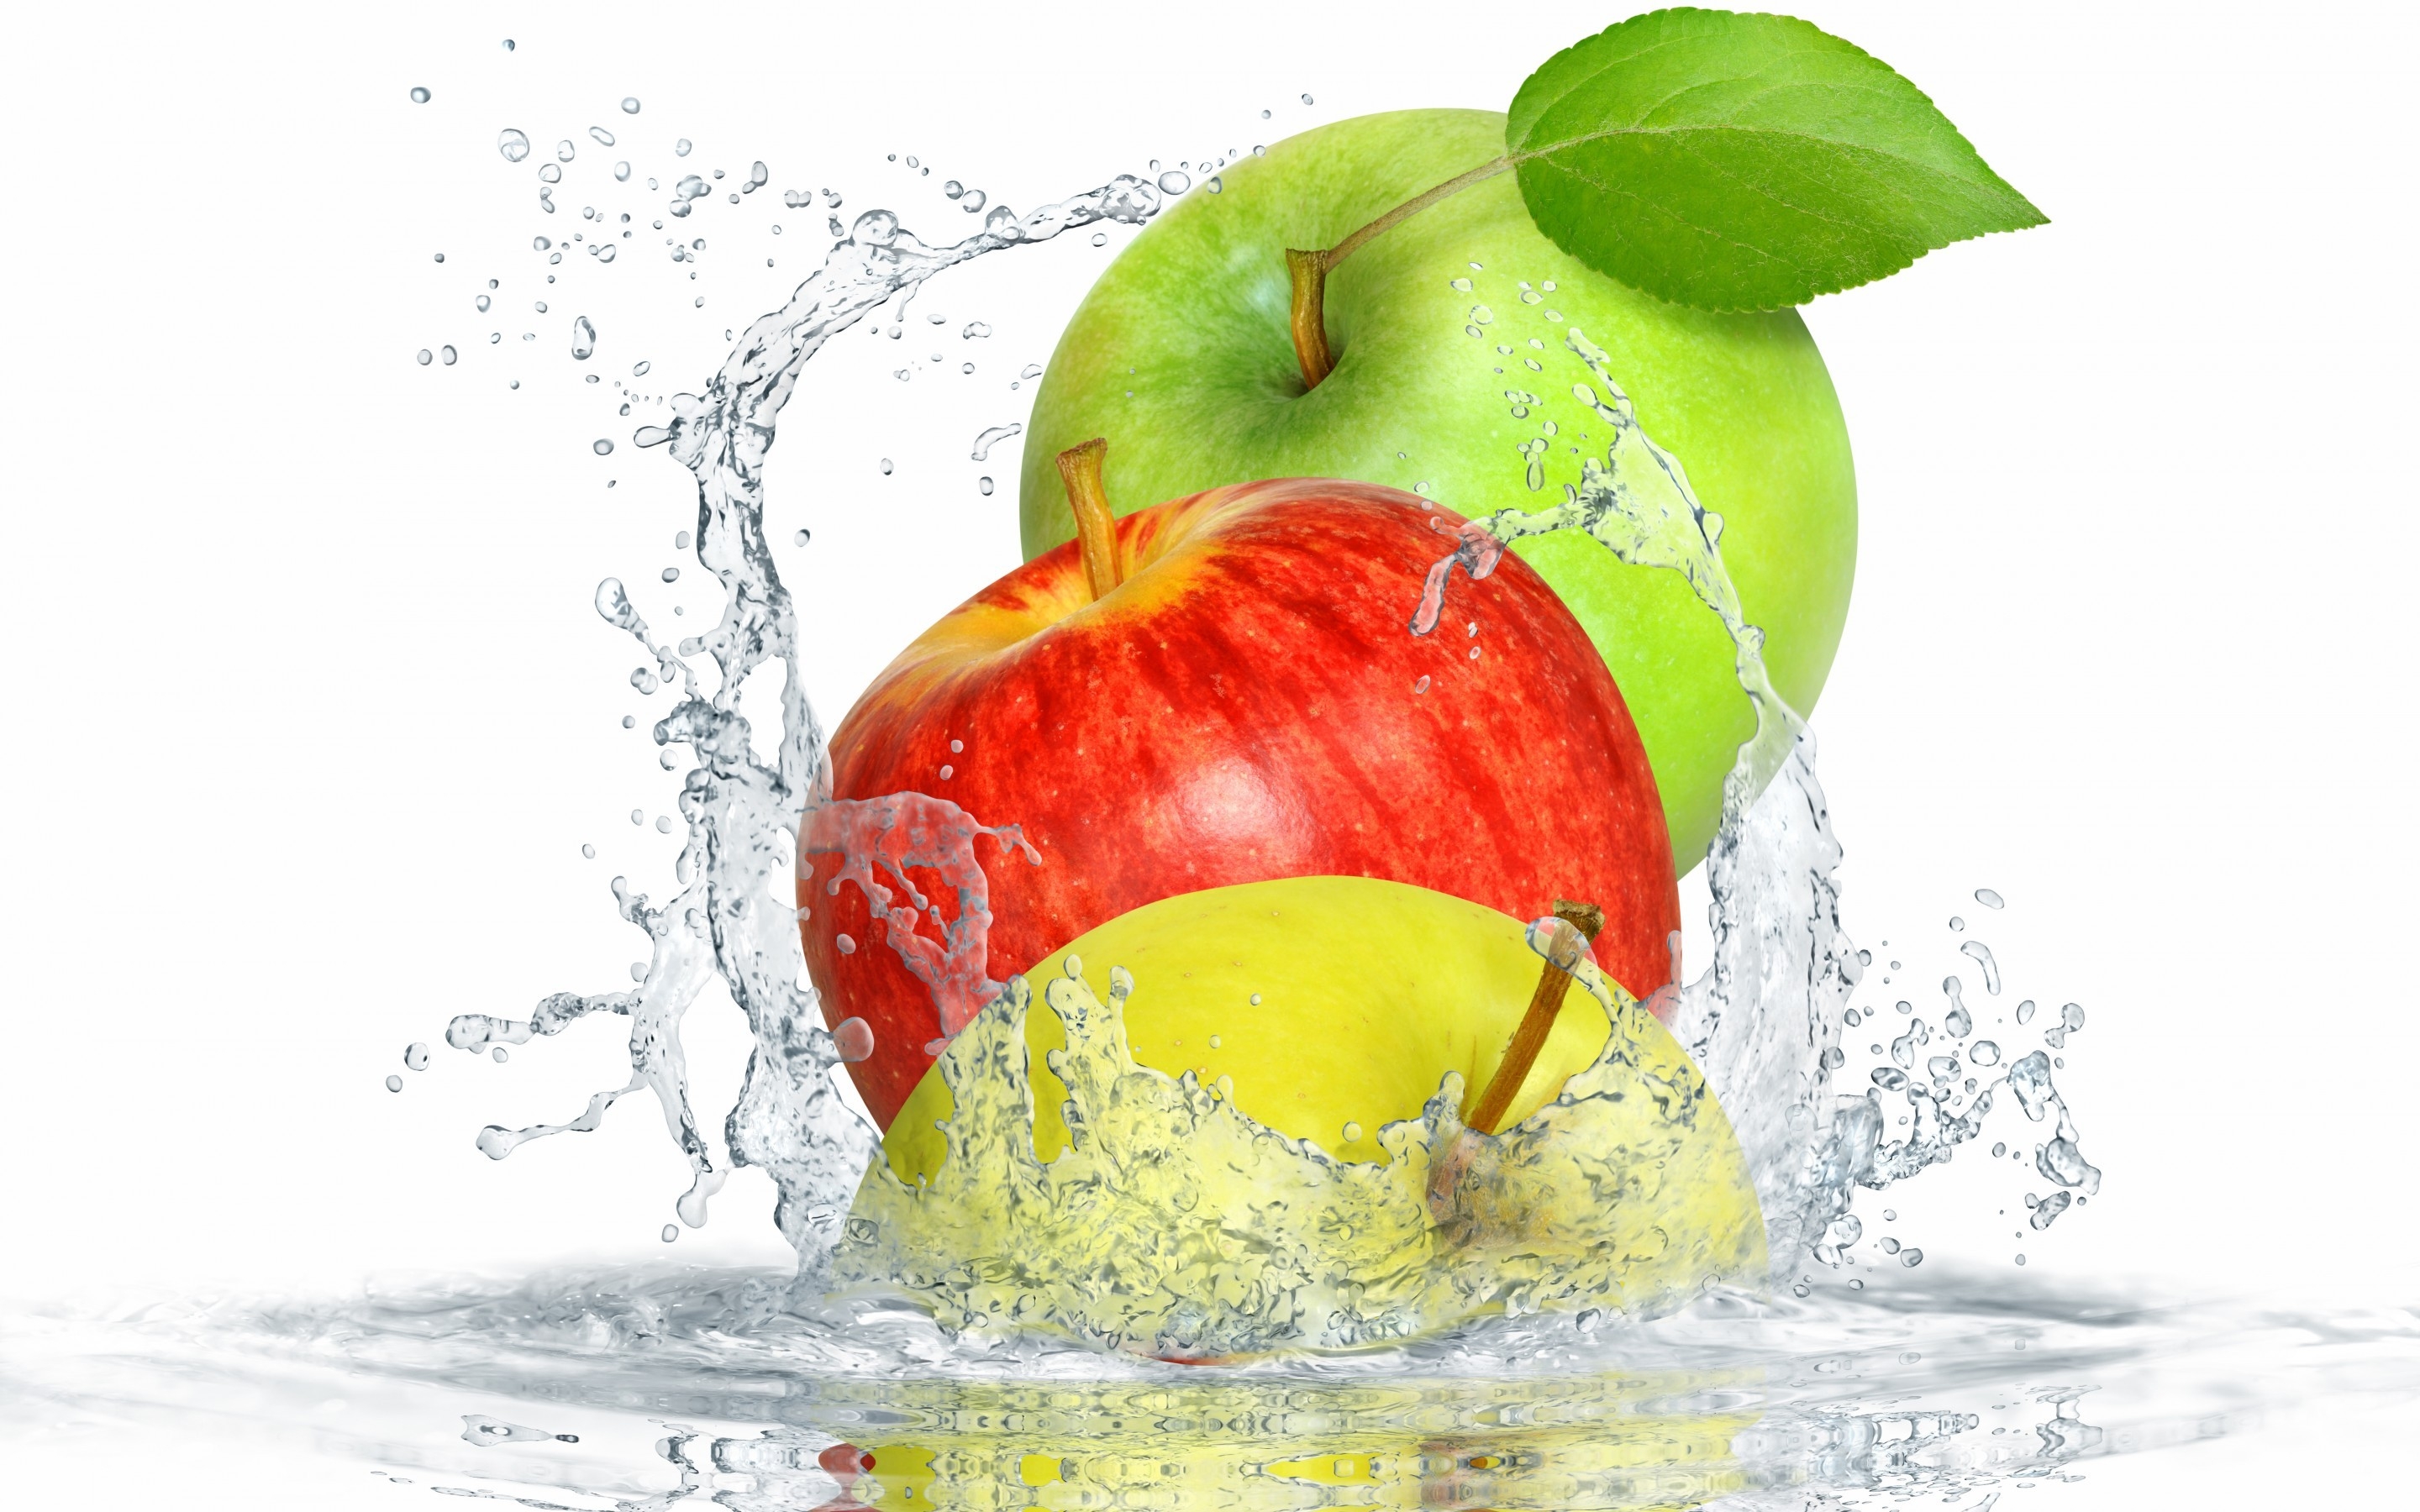 Red and Green Apples for 2880 x 1800 Retina Display resolution